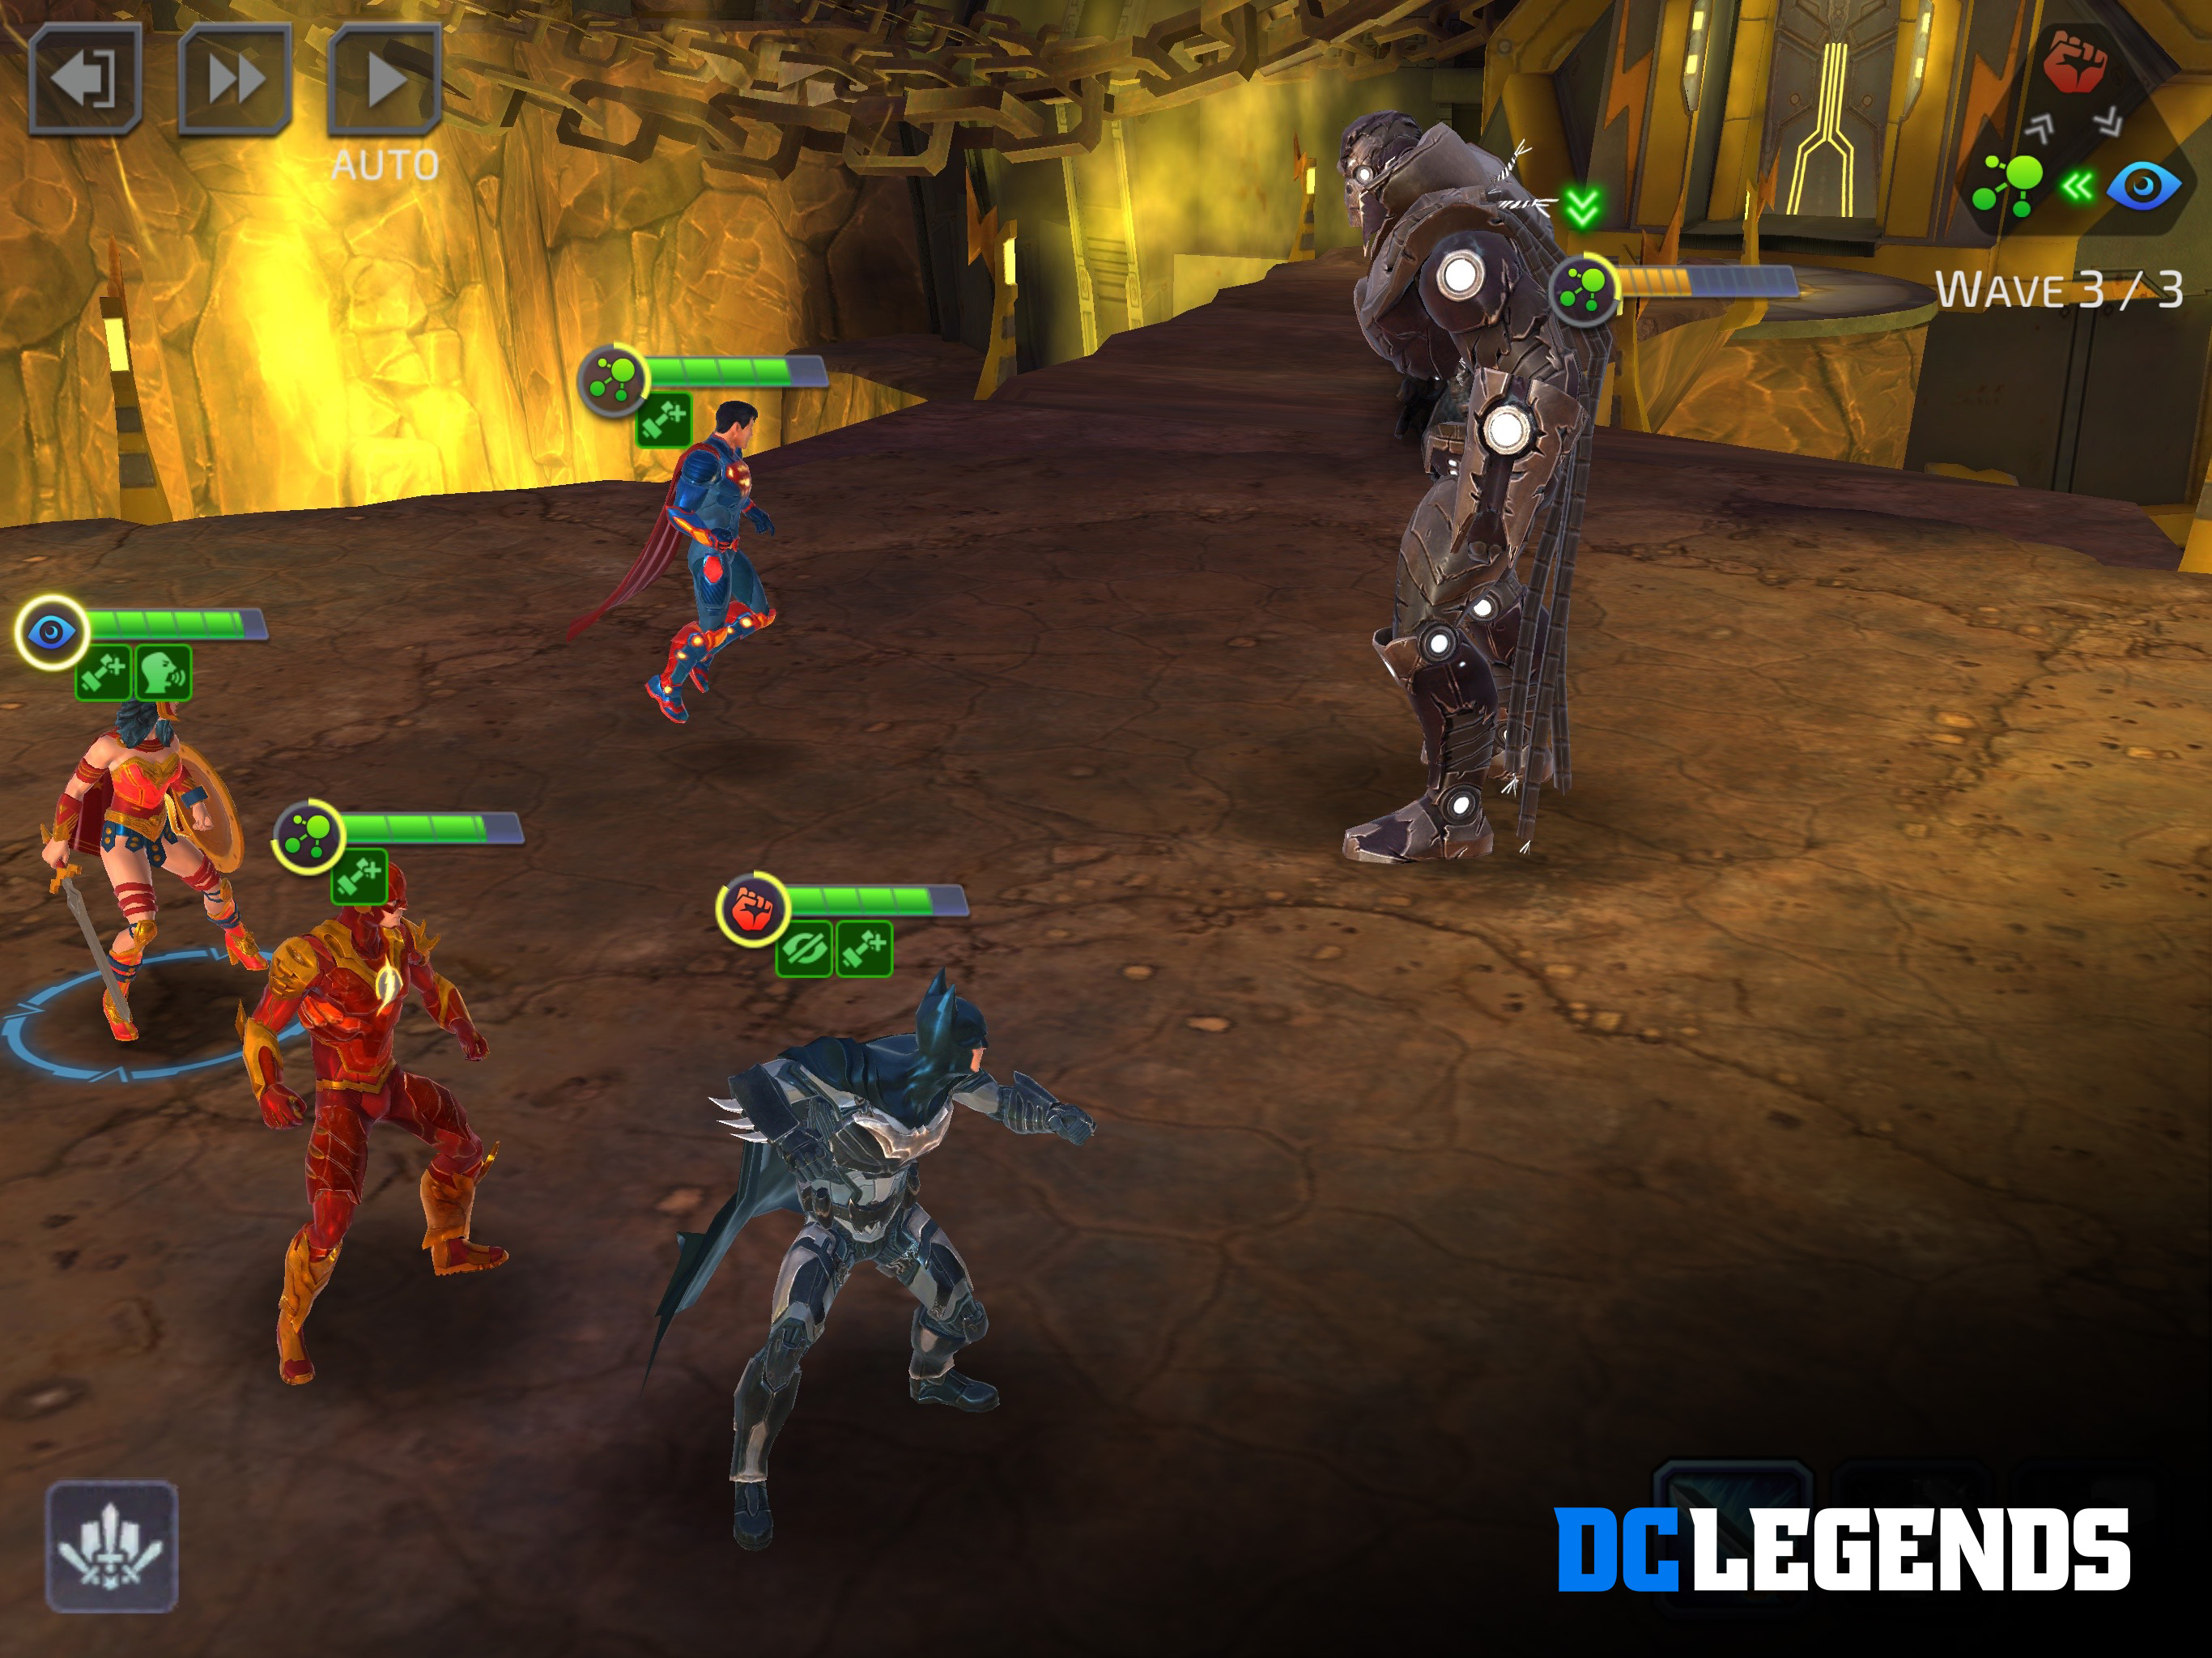 DC Legends: Tips and Tricks